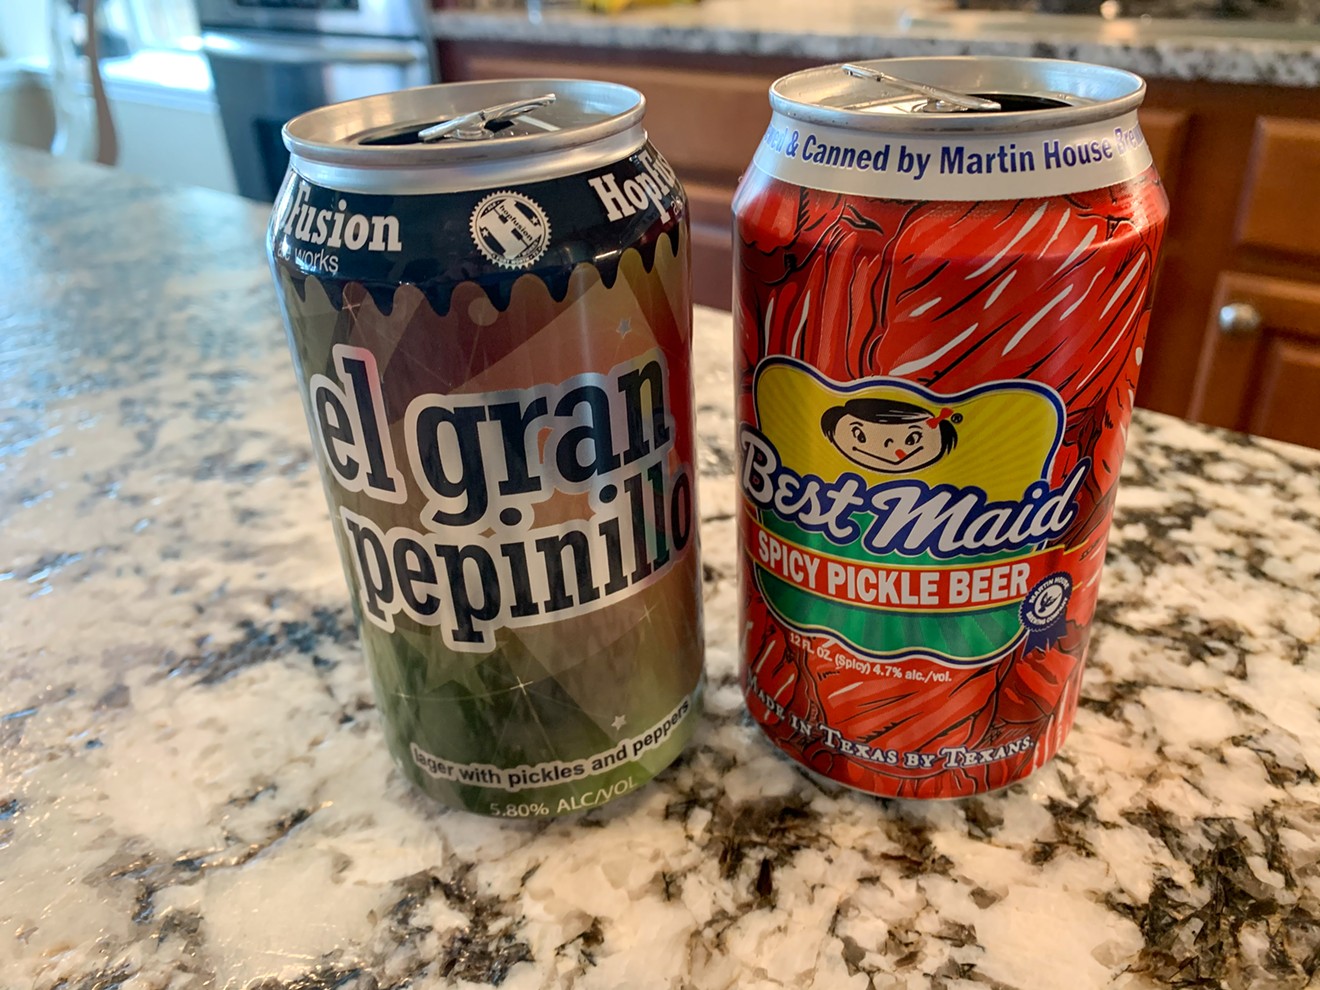 HopFusion Ale Works’ El Gran Pepinillo pickle lager (left) and Martin House Brewing's Best Maid Spicy Pickle Beer